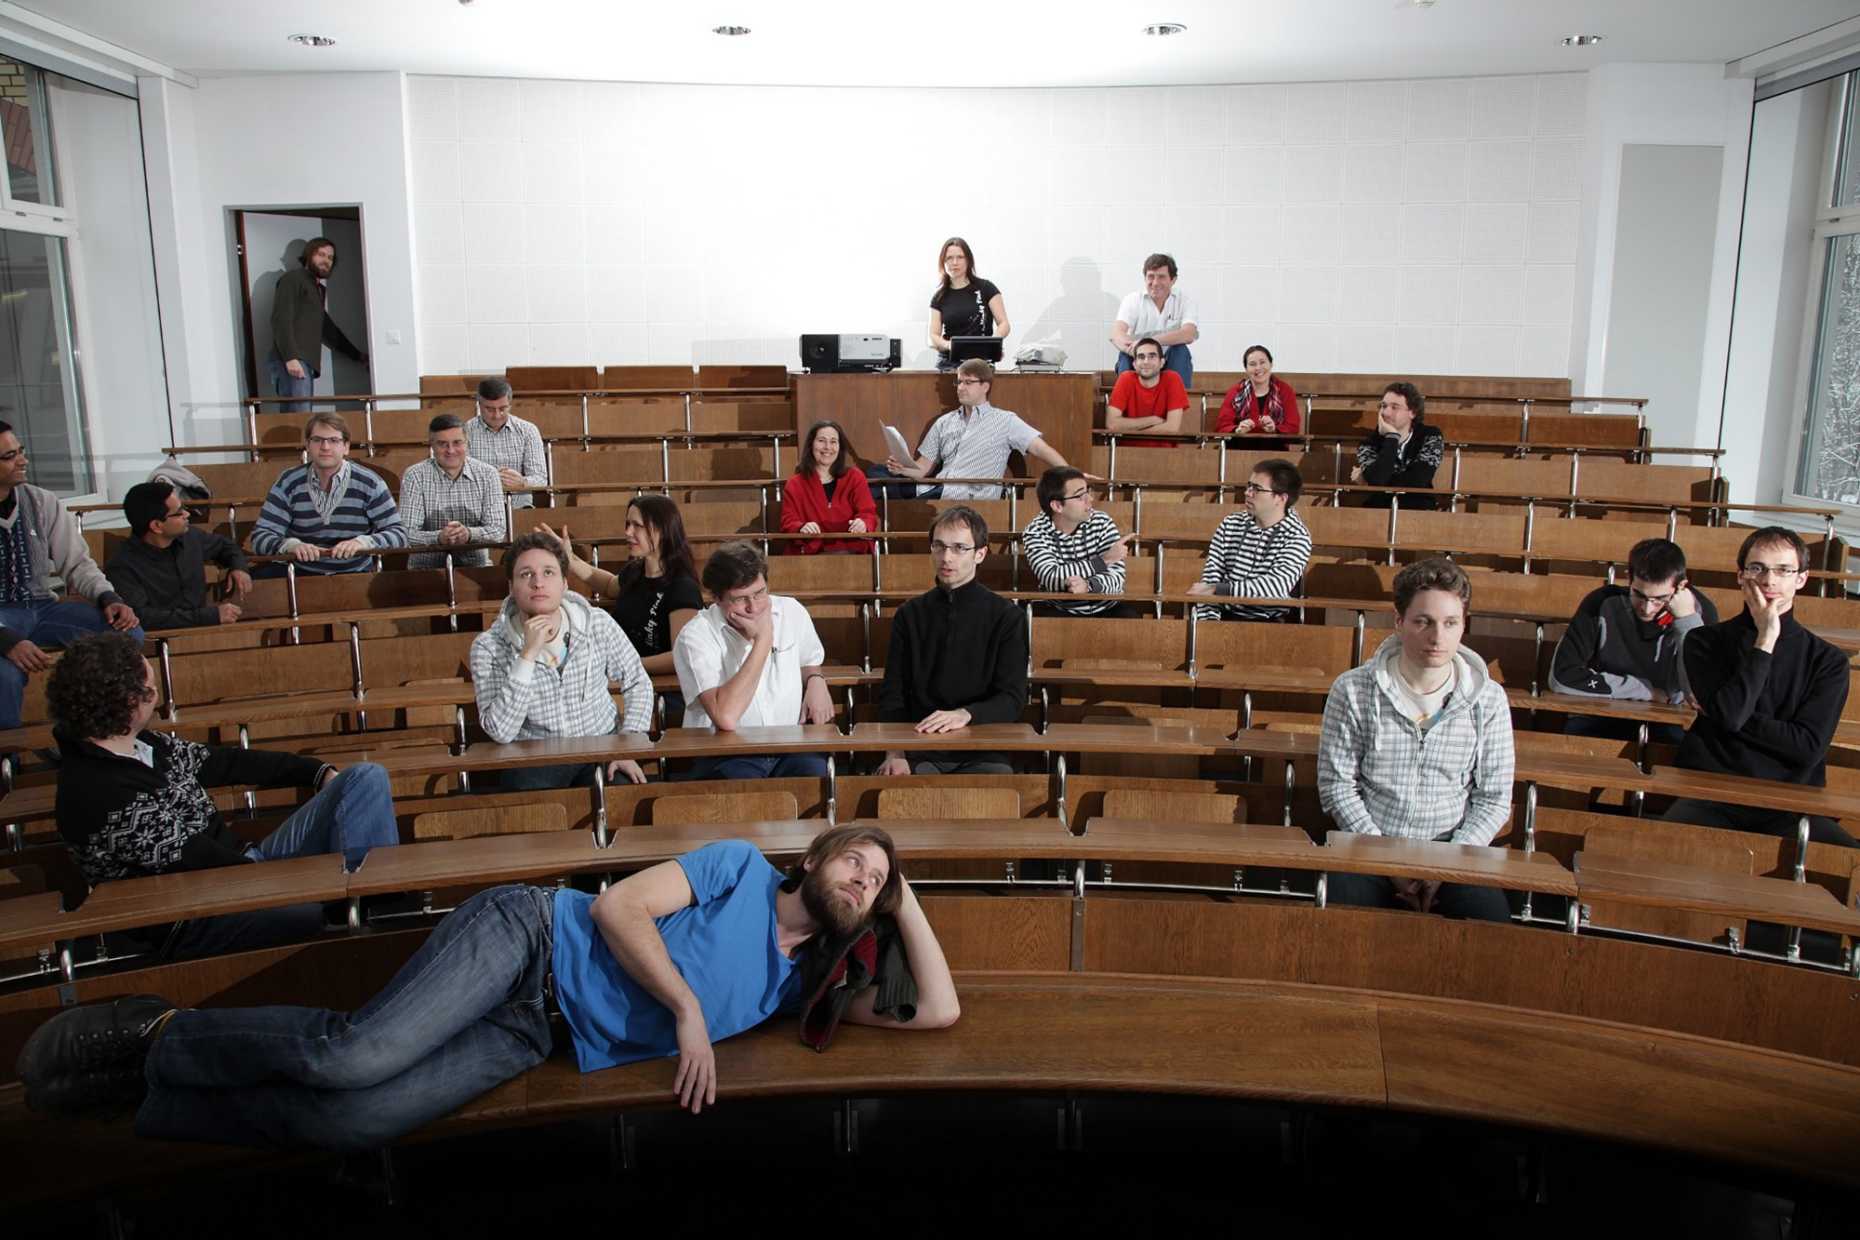 Enlarged view: Group of Prof. Widmayer with Marianna Berger in lecture hall